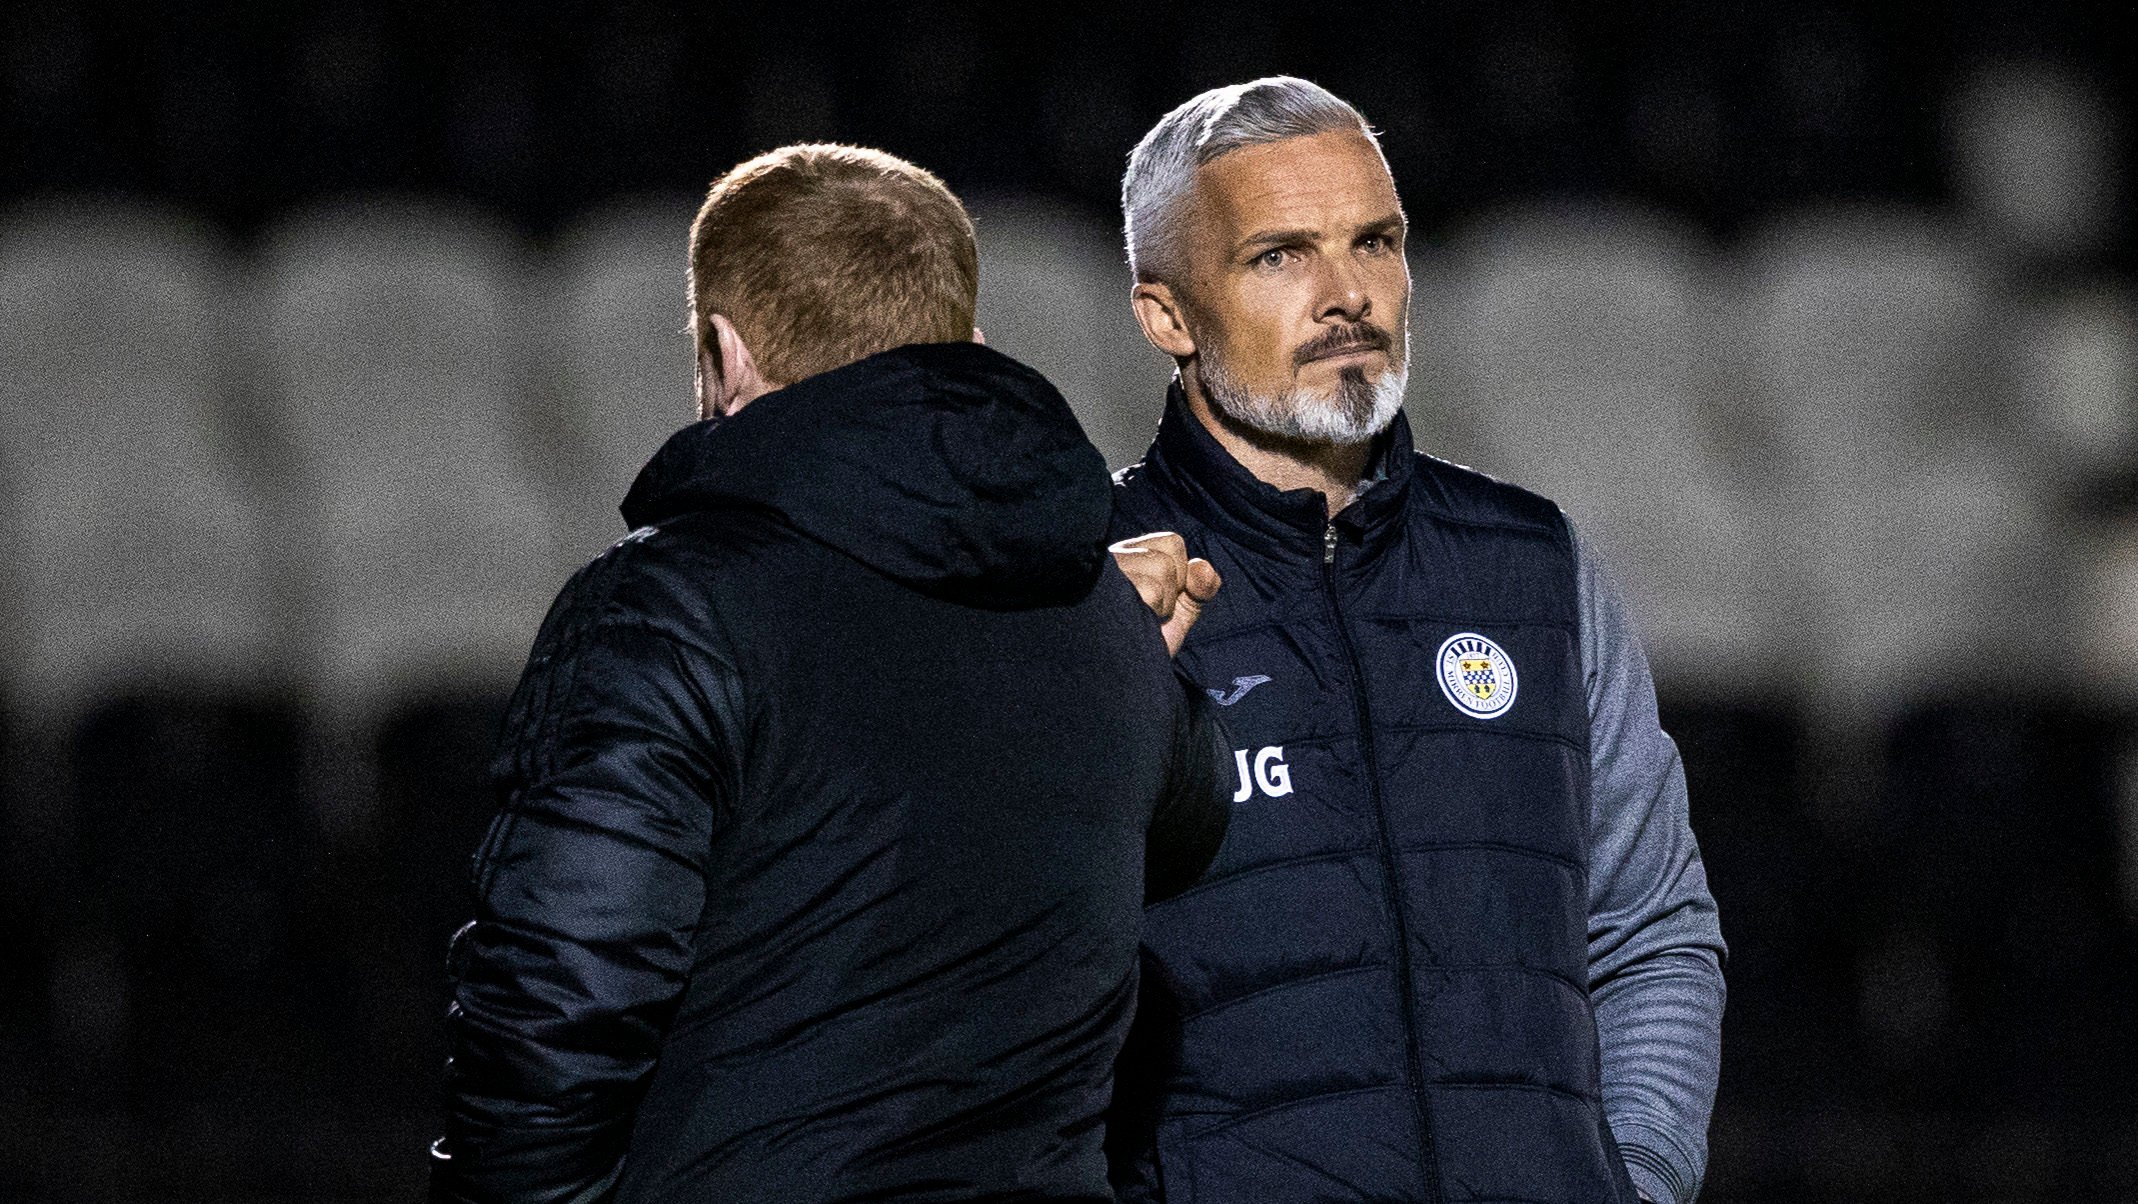 Jim Goodwin has a dig at Neil Lennon Celtic press conference comments